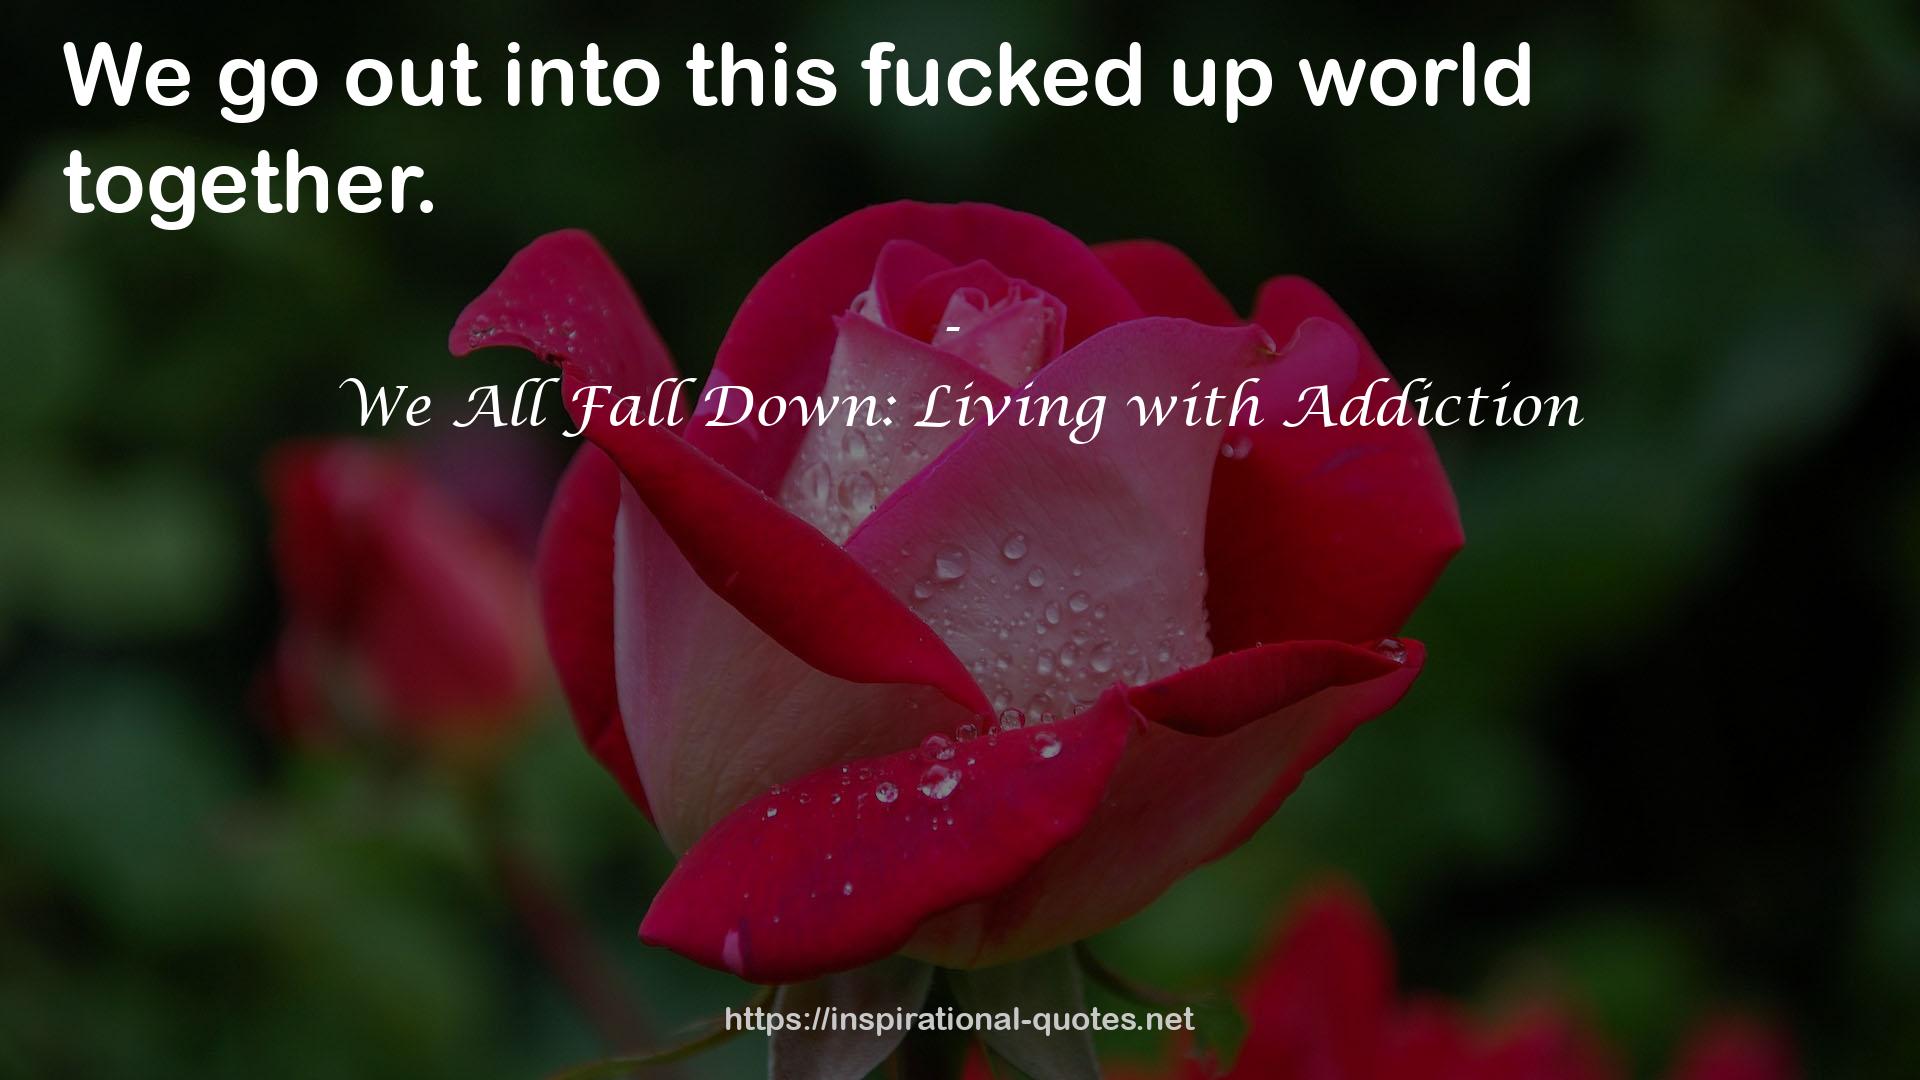 We All Fall Down: Living with Addiction QUOTES